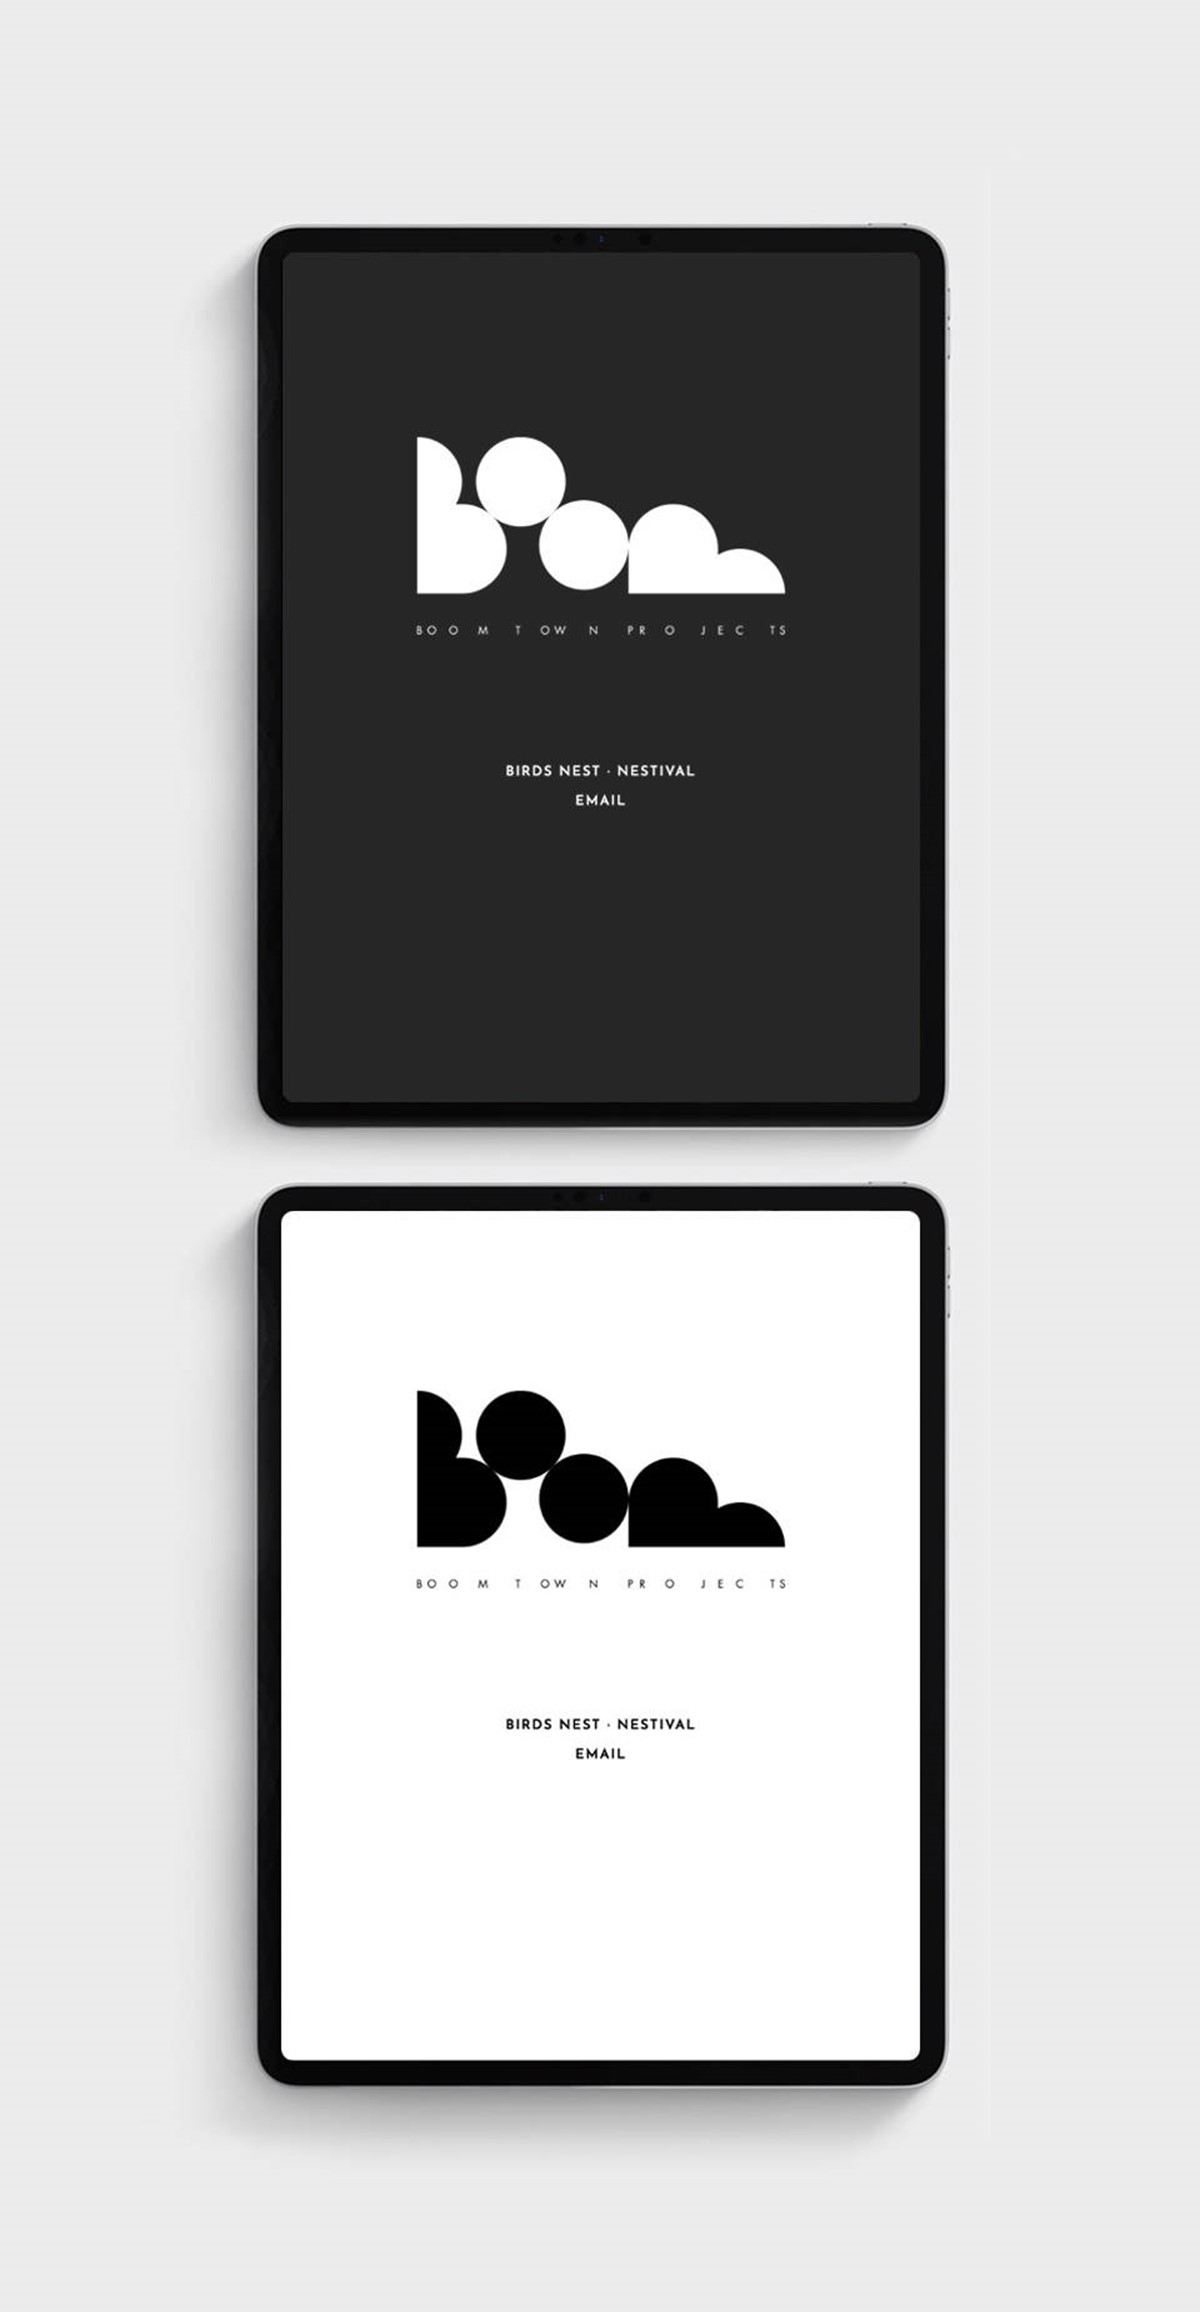 Boom Town Projects. Holding page. Bespoke typographic identity design by Superfried.